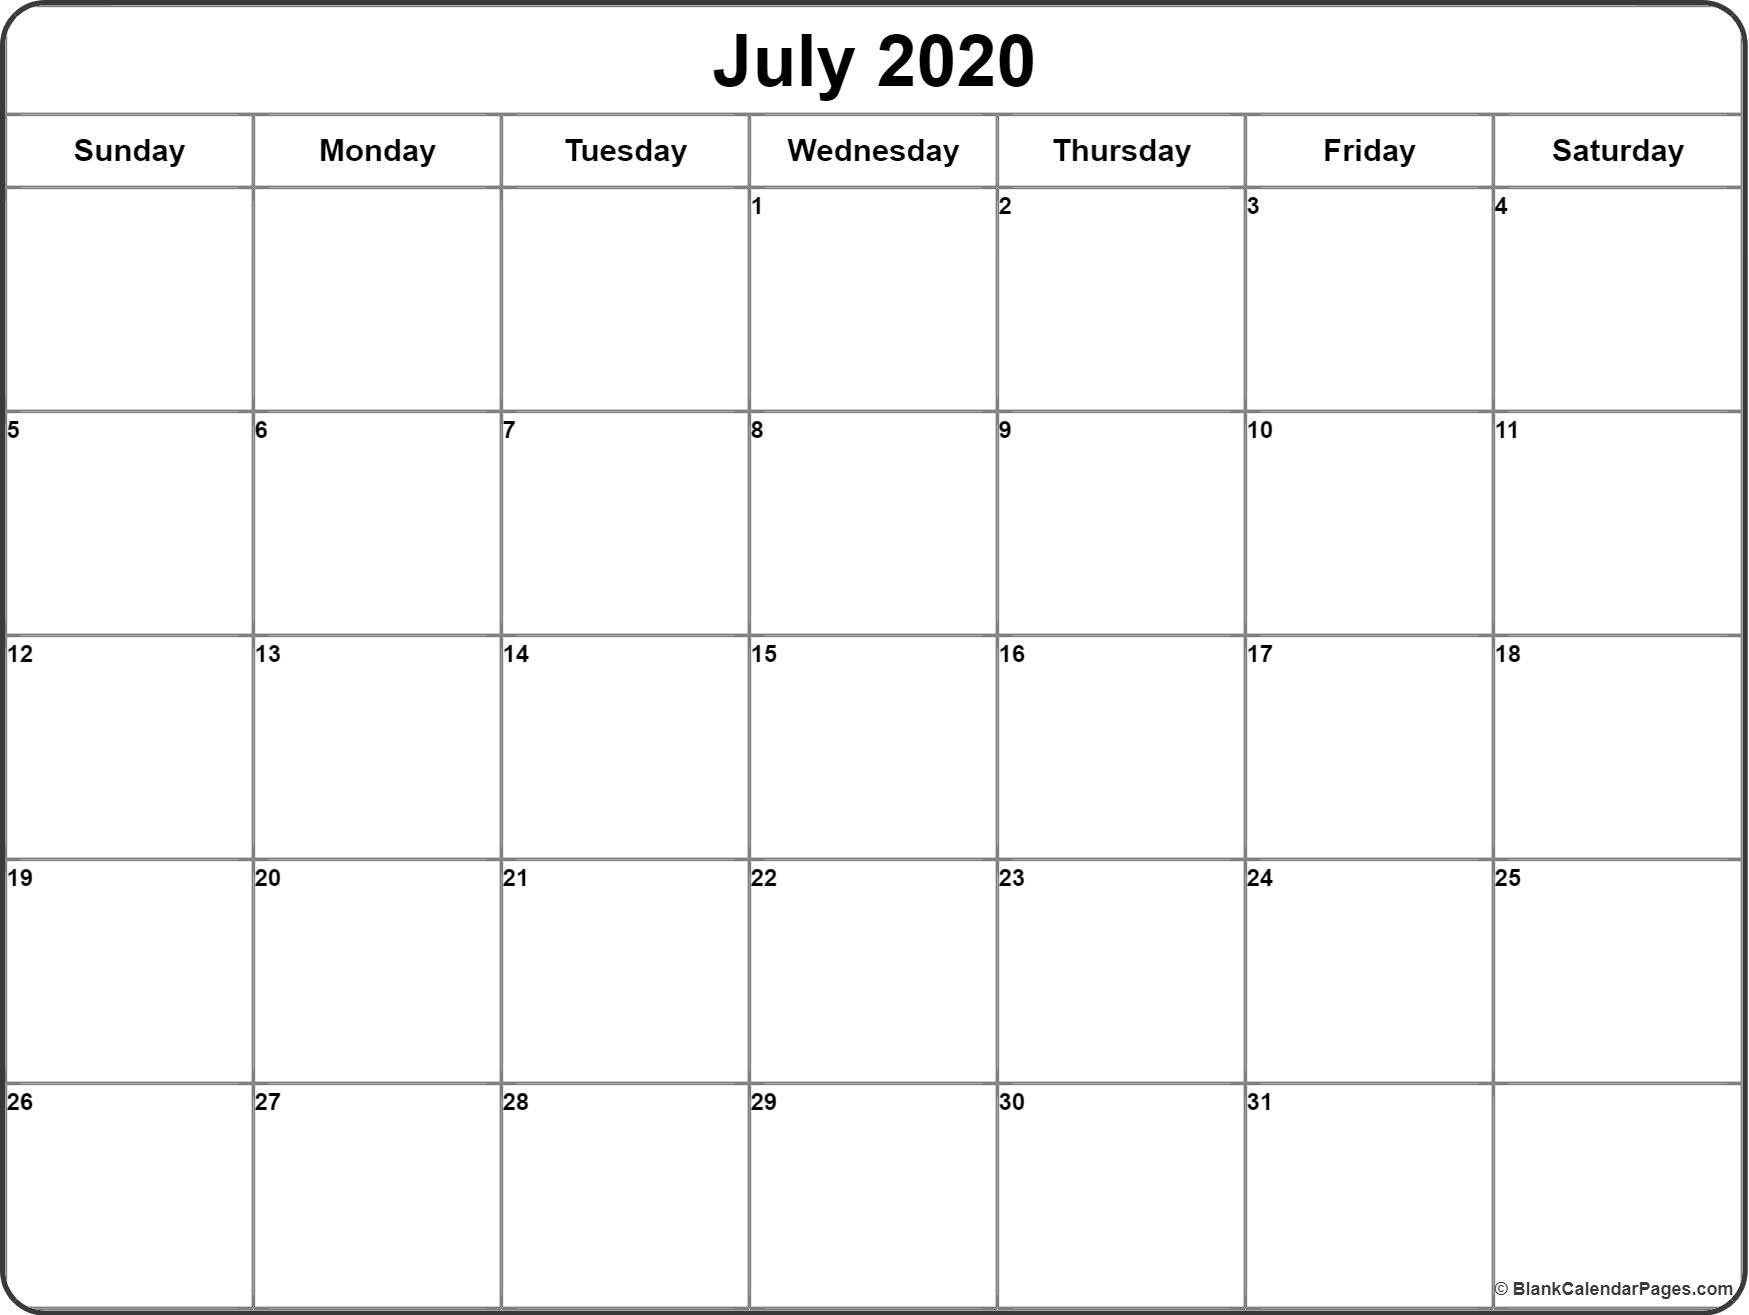 July 2020 Calendar | Free Printable Monthly Calendars-Printable Blank 2020 Calendar For June July And August